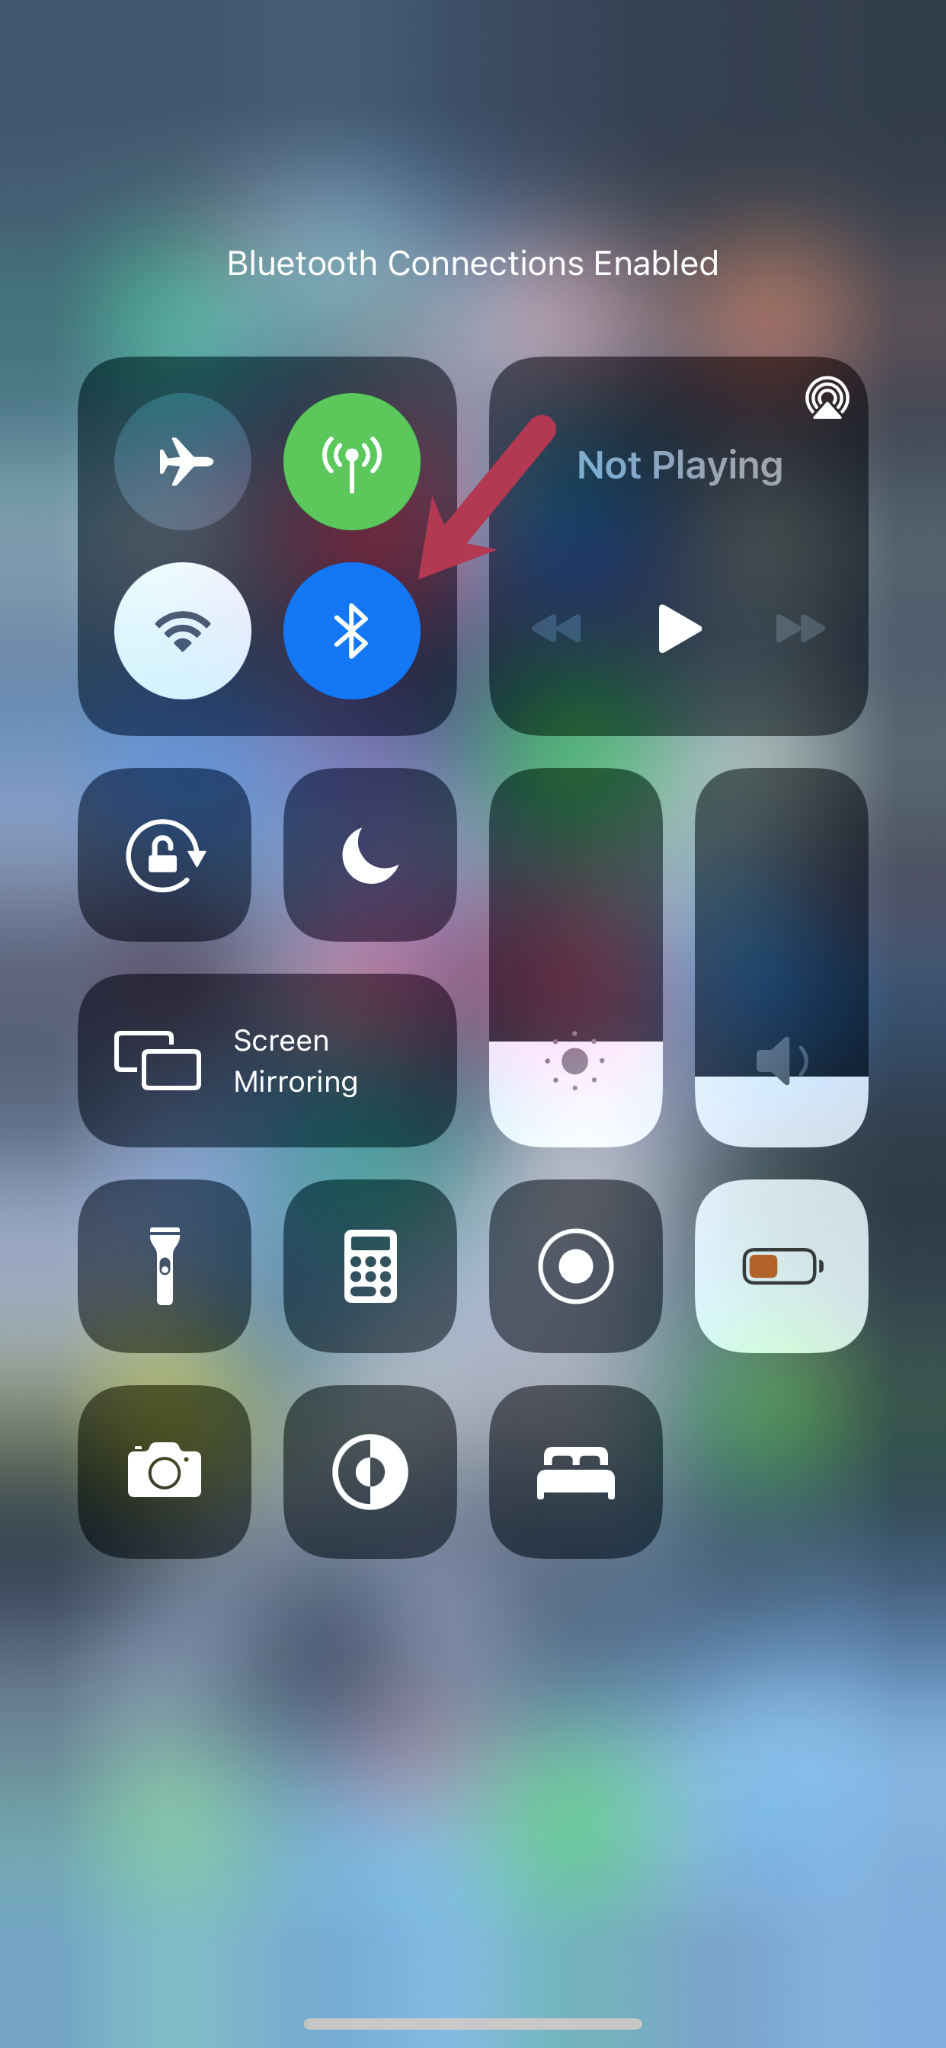 after-you-tap-the-bluetooth-icon-in-your-control-center-to-turn-it-on-the-icon-will-turn-blue-to-indicate-success